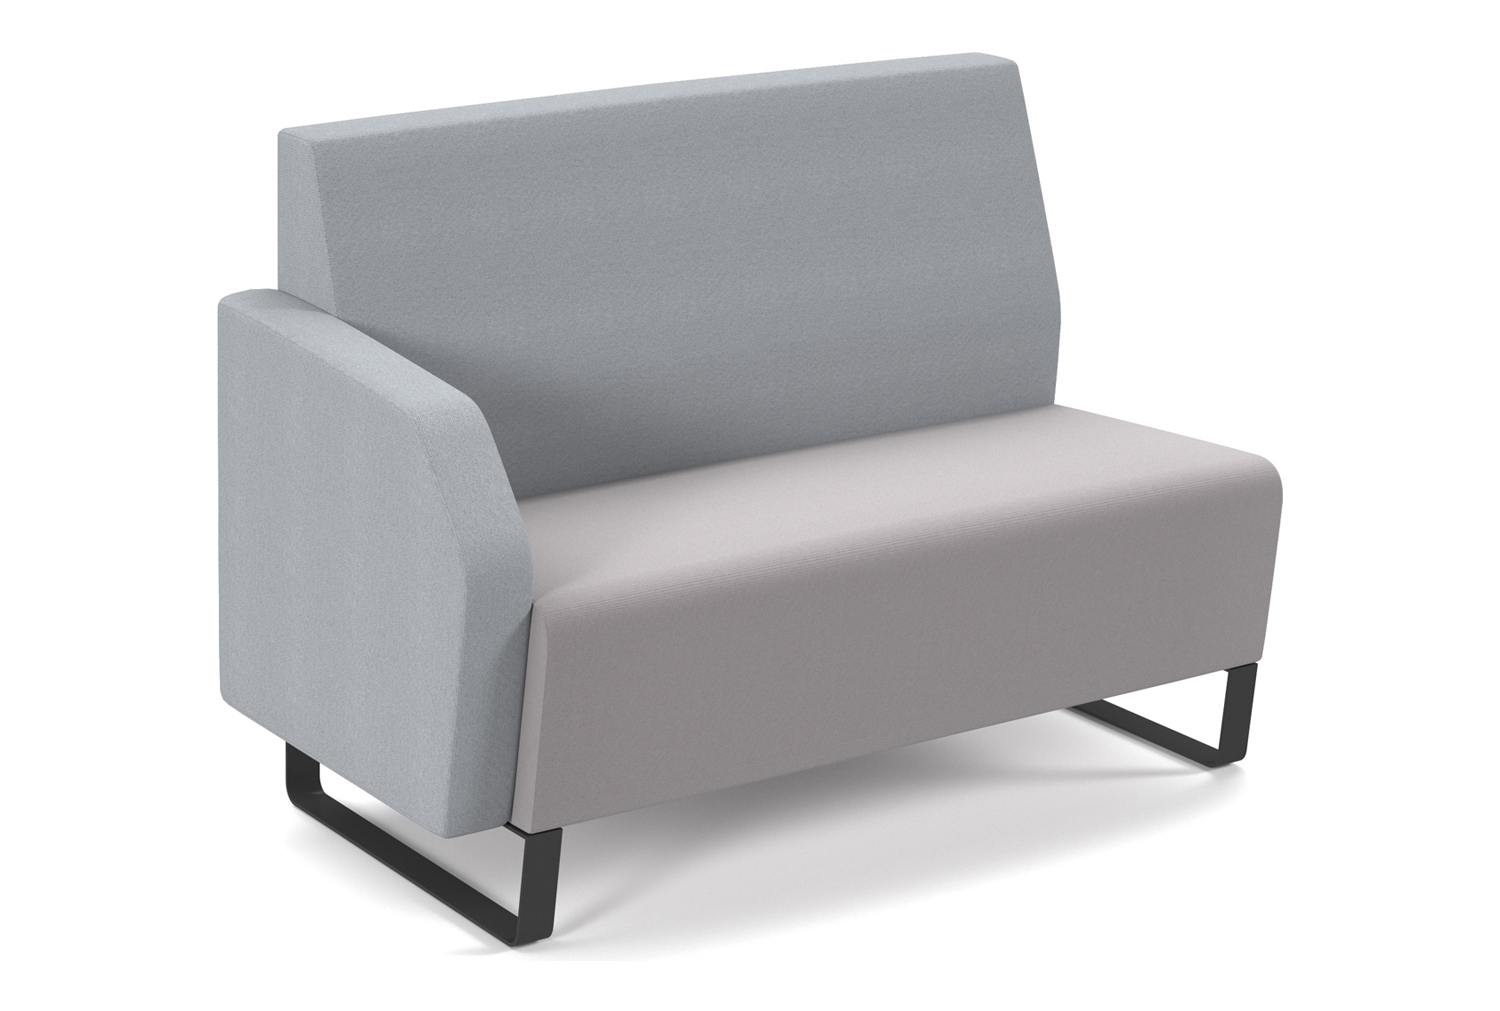 Niche Double Low Back Sofa With Right Hand Arm (Black Sled Frame), Forecast Grey Seat/Late Grey Back, Fully Installed